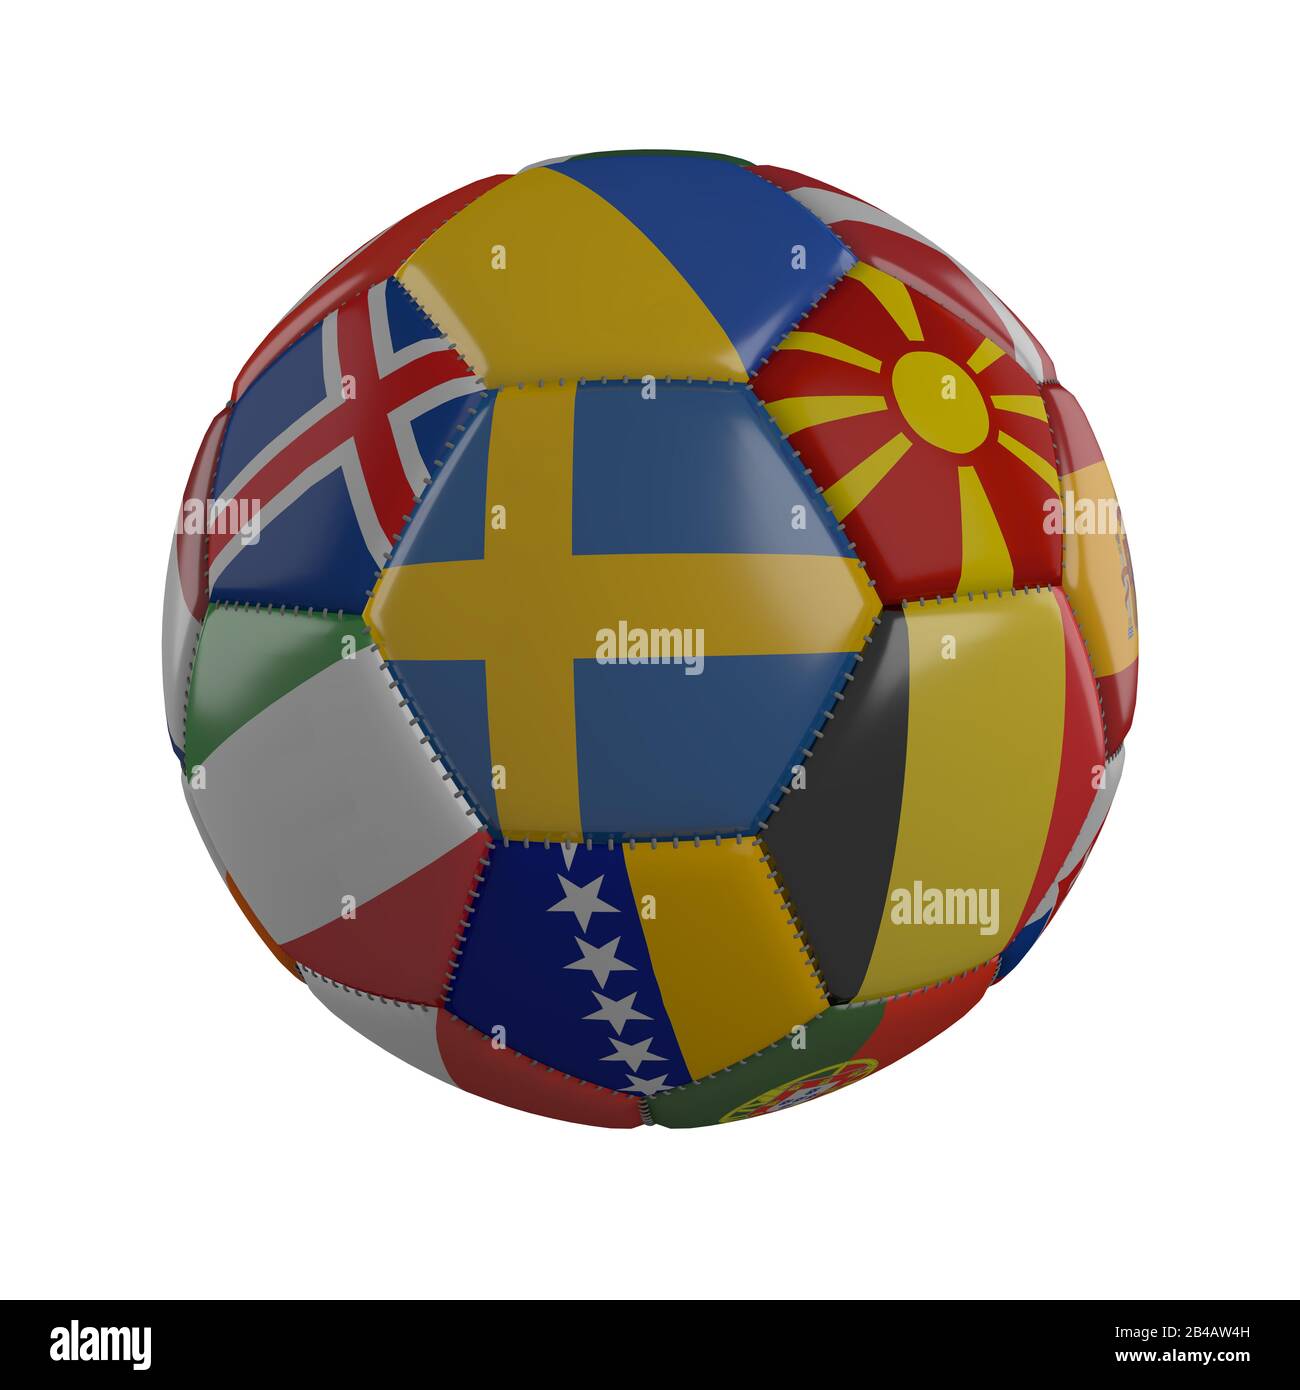 Sweden flag on a soccer ball with flags of European states on a white background, 3D render Stock Photo